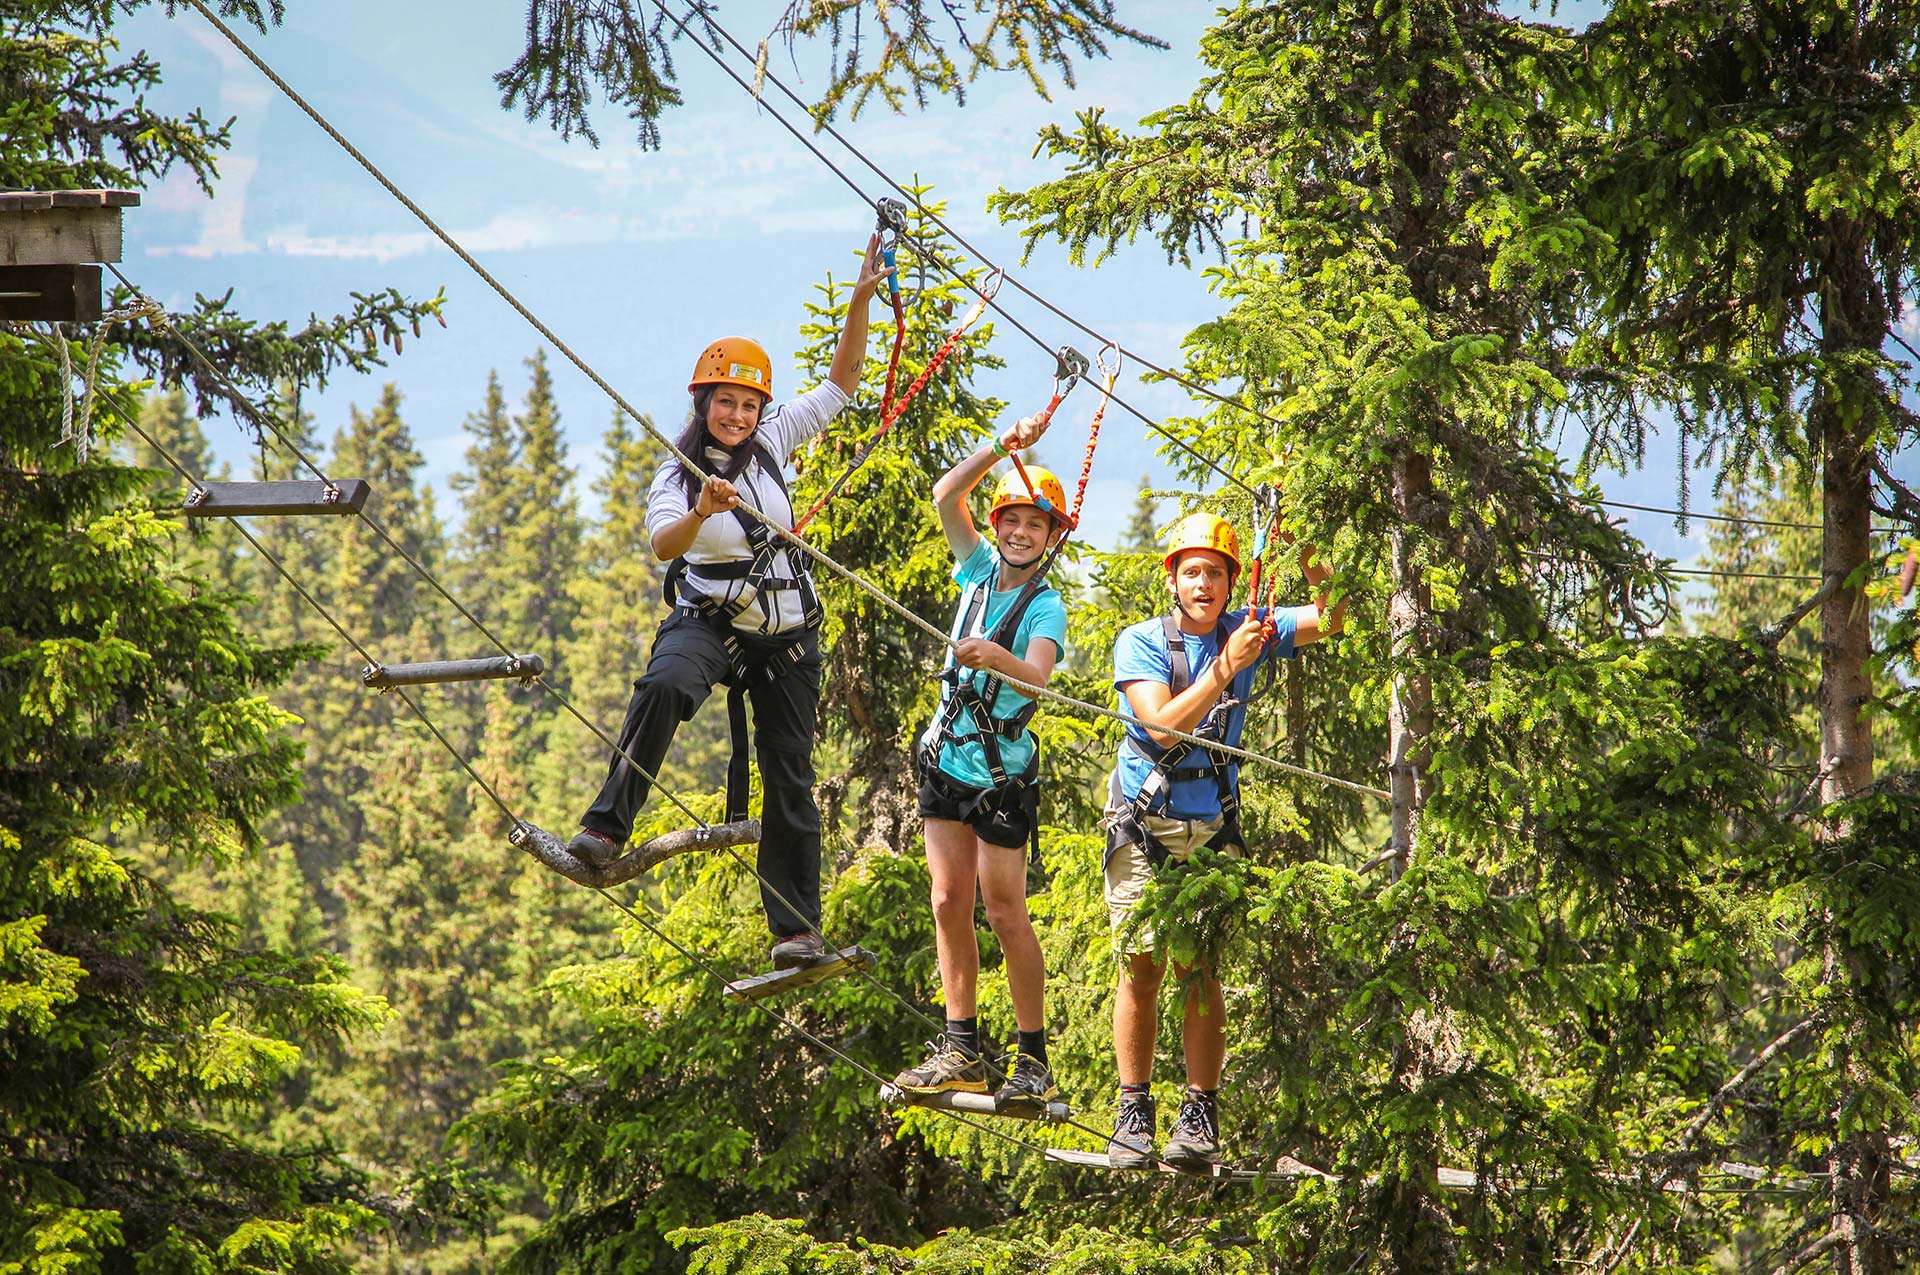 High ropes course, fun for the whole family